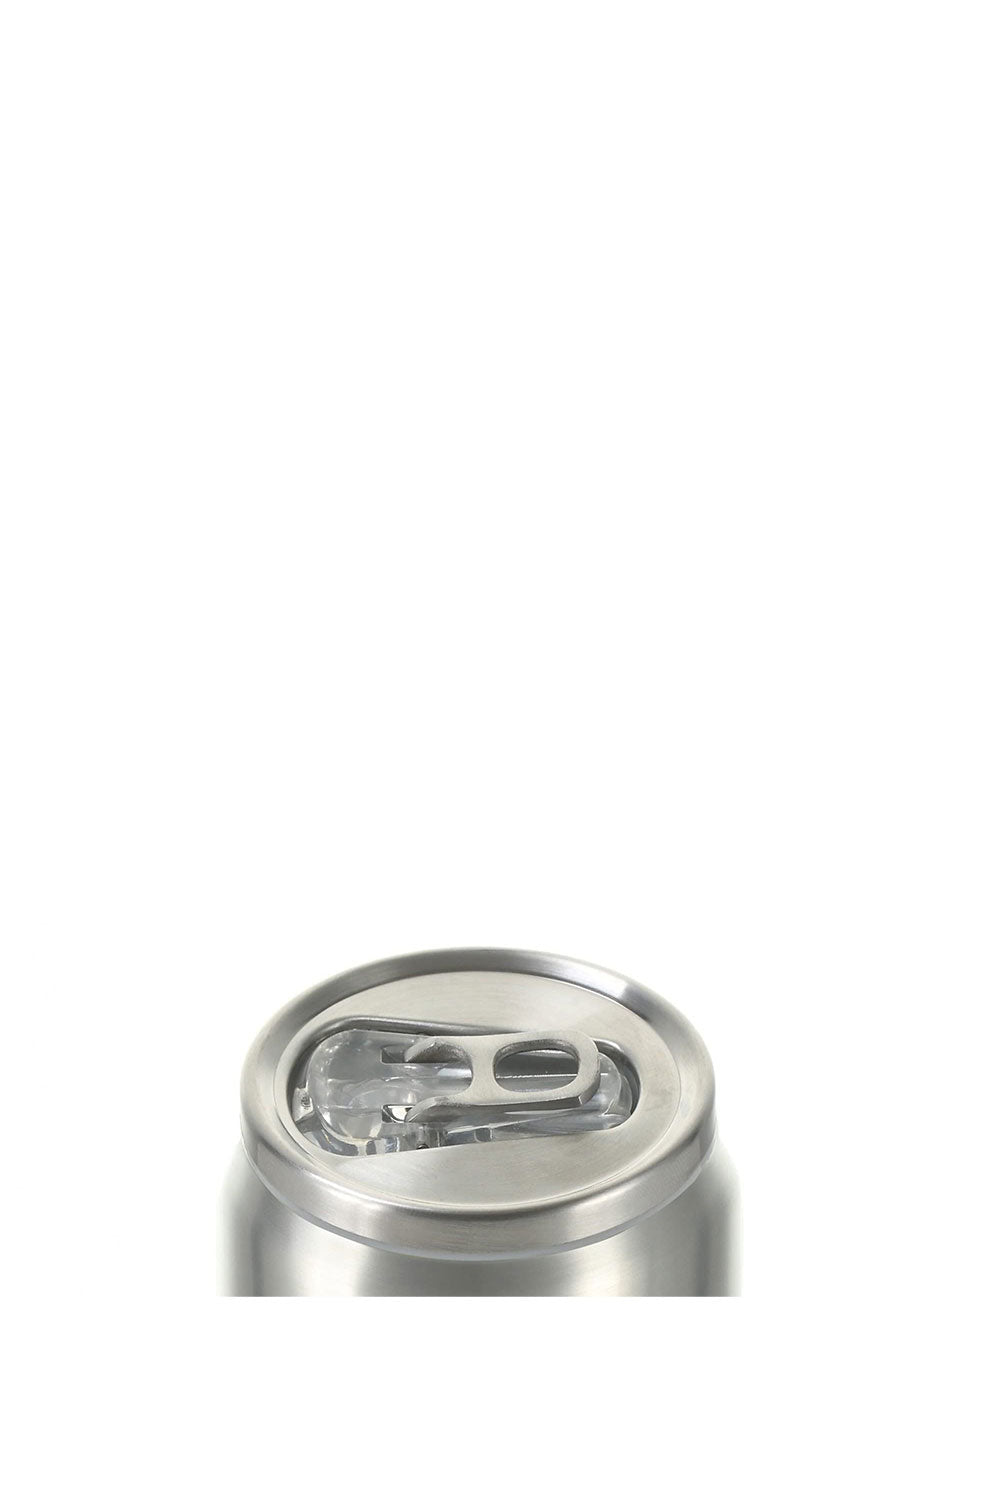 Metal Texture Bril Can, 500 ml - Maison7